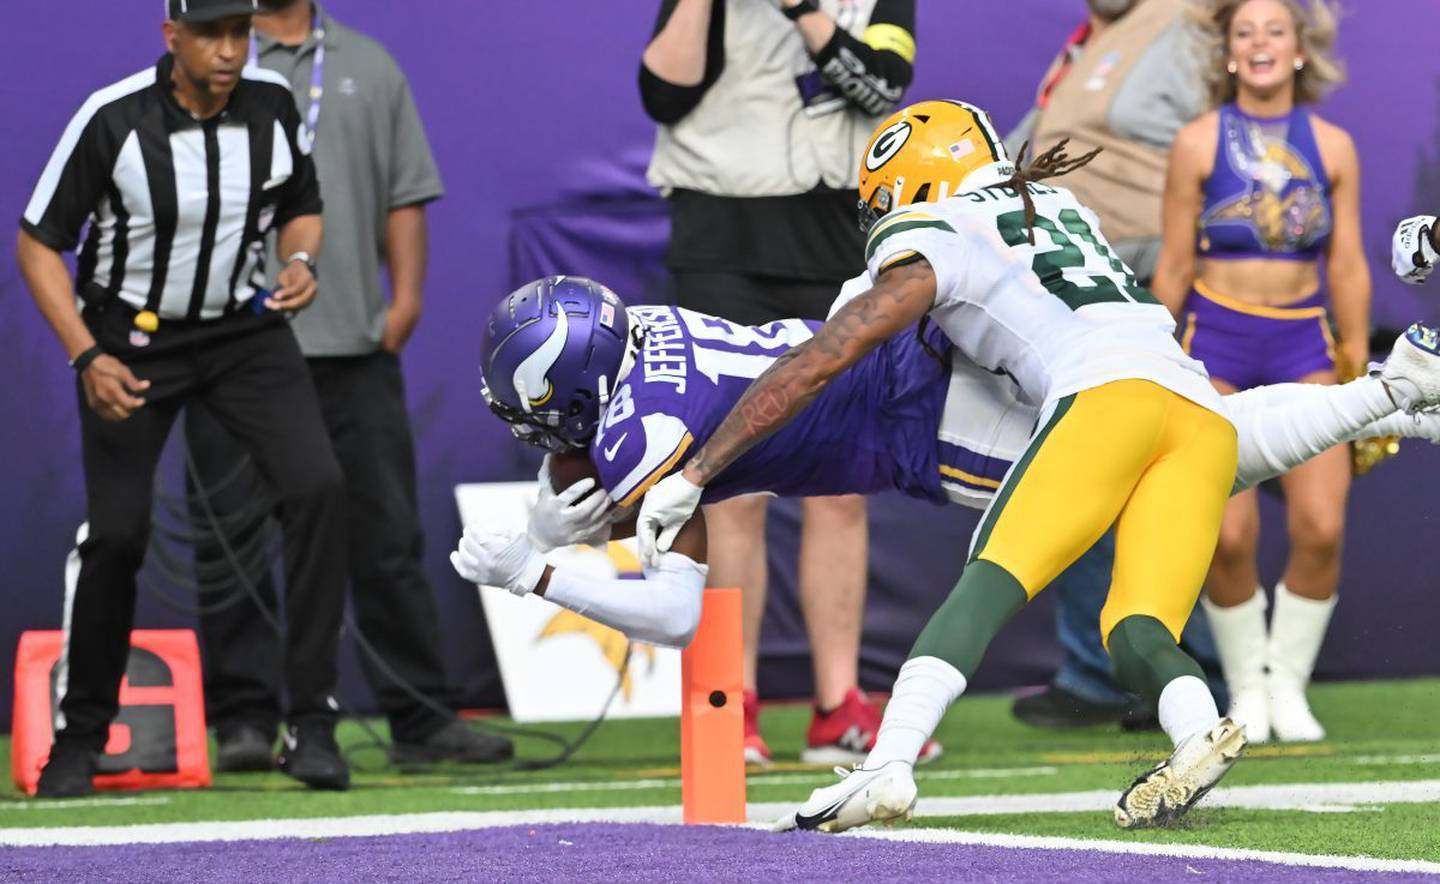 Vikings wide receiver Justin Jefferson dives into the end zone against Packers cornerback Eric Stokes for his second touchdown of the game on Sept. 11, 2022, at U.S. Bank Stadium in Minneapolis. 